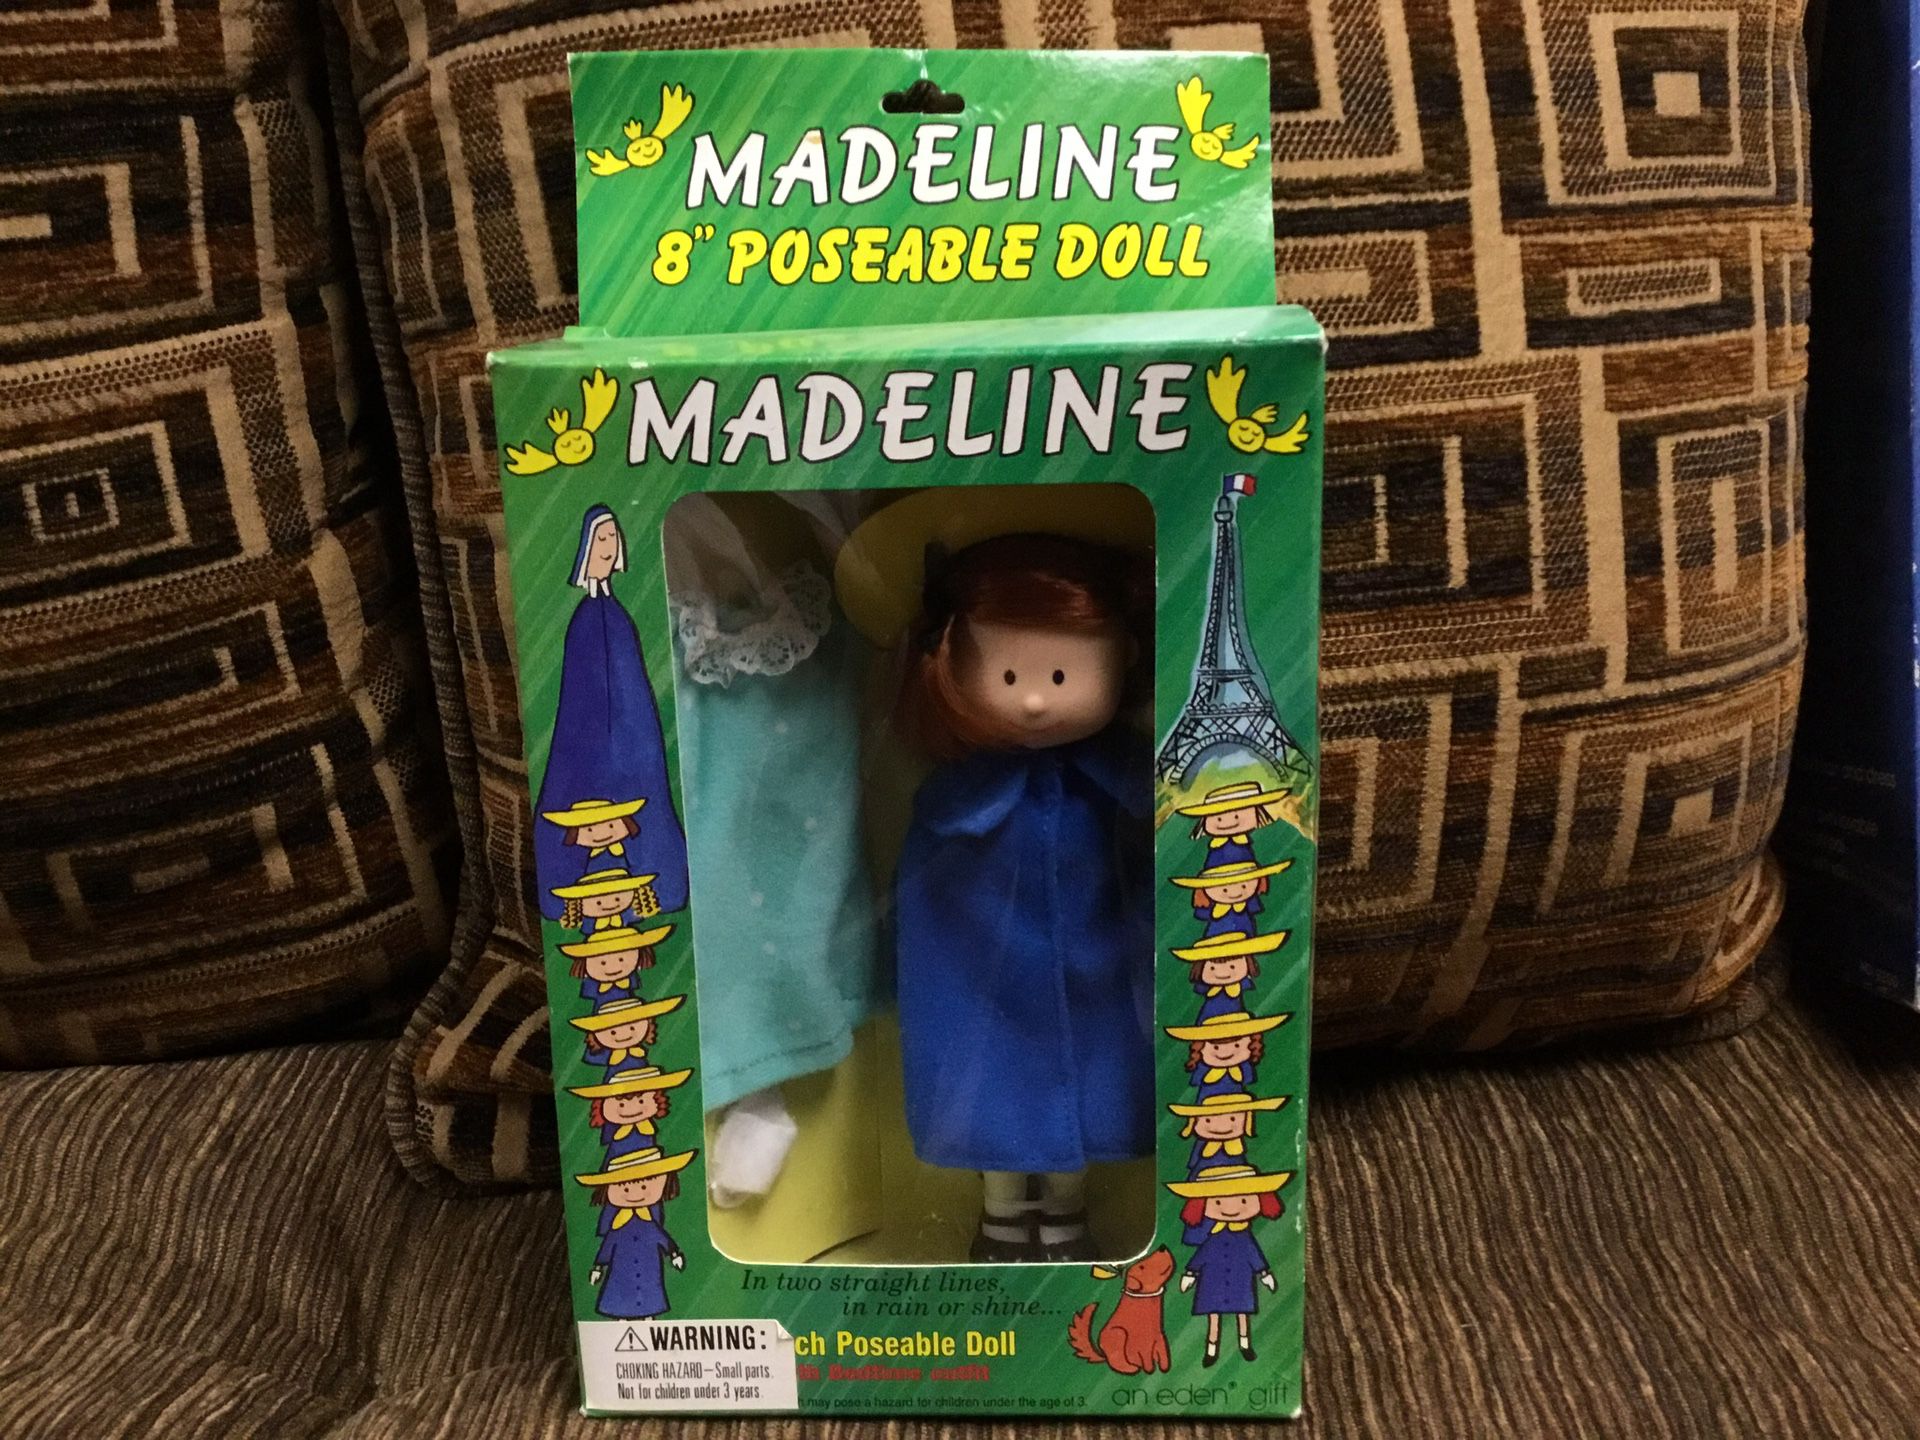 Collectible “Madeline” doll